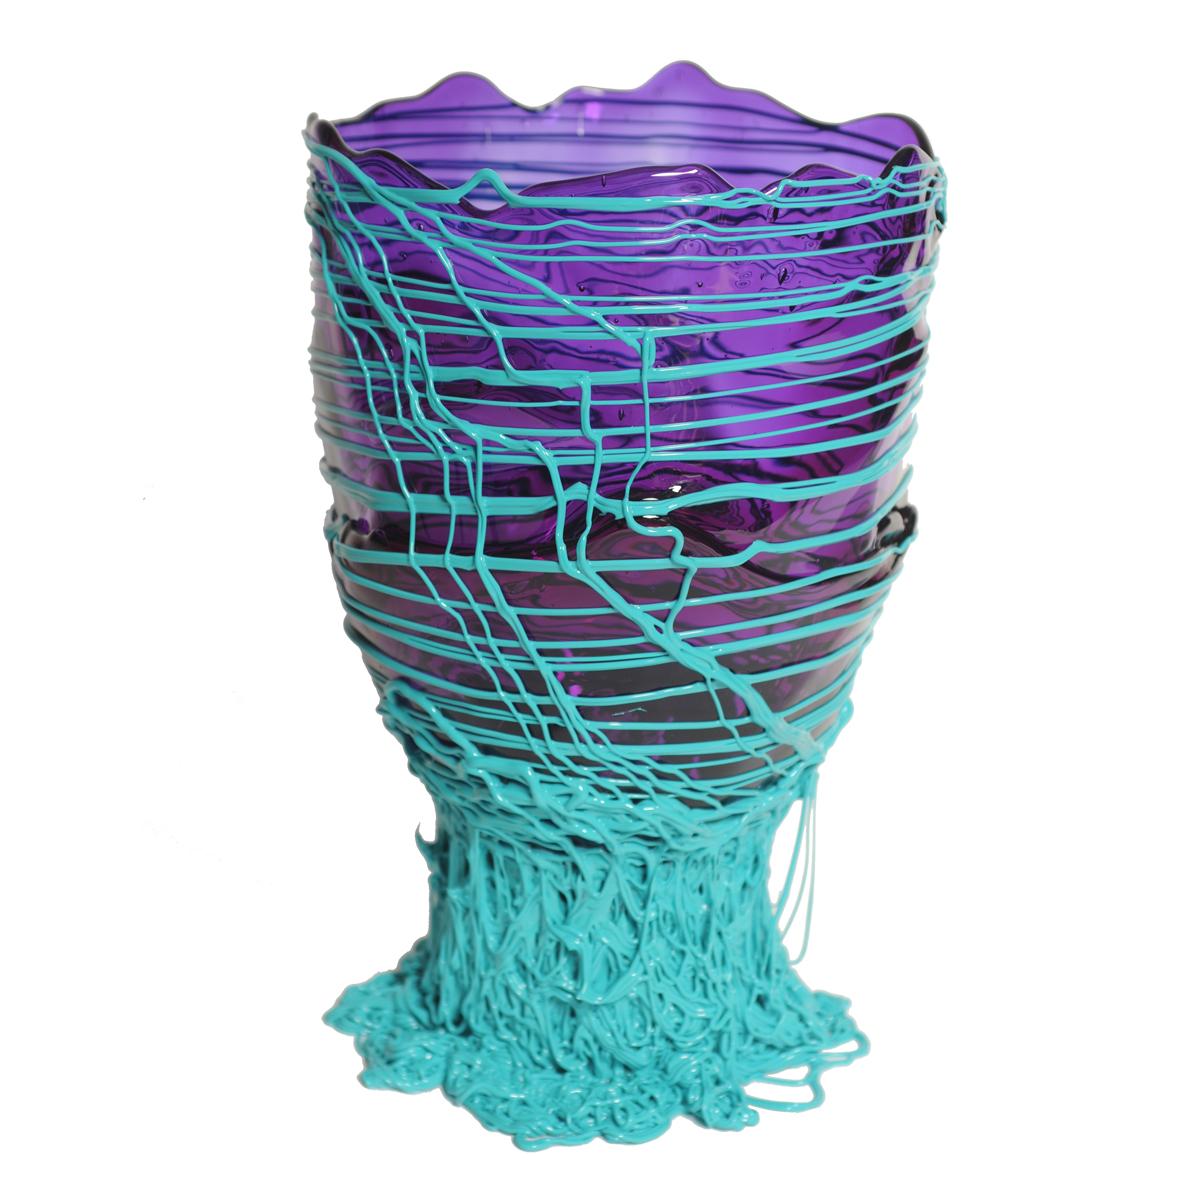 Spaghetti vase, purple, turquoise.

Vase in soft resin designed by Gaetano Pesce in 1995 for Fish Design collection.

Measures: L ø 22cm x H 36cm

Other sizes available.

Colours: purple, turquoise.
Vase in soft resin designed by Gaetano